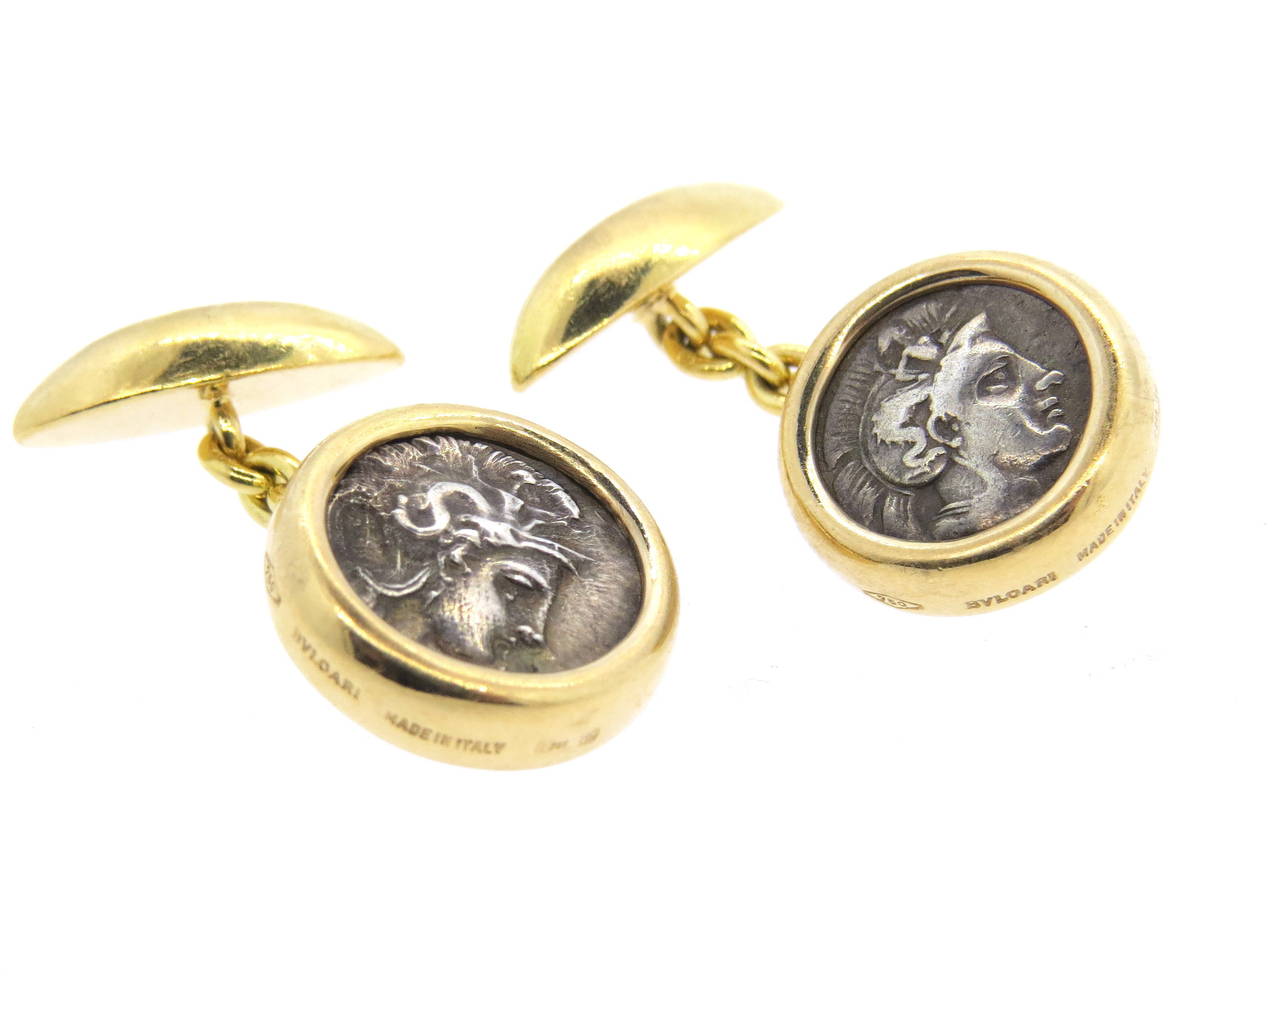 Pair of 18k yellow gold cufflinks, crafted by Bulgari, set with ancient coins in the center. Top measures 14mm in diameter. Marked Lucania-Thurion, 4th cent B.C., Calabria-Tarentum, made in Italy, 750, Bvlgari. Weight - 19 grams.